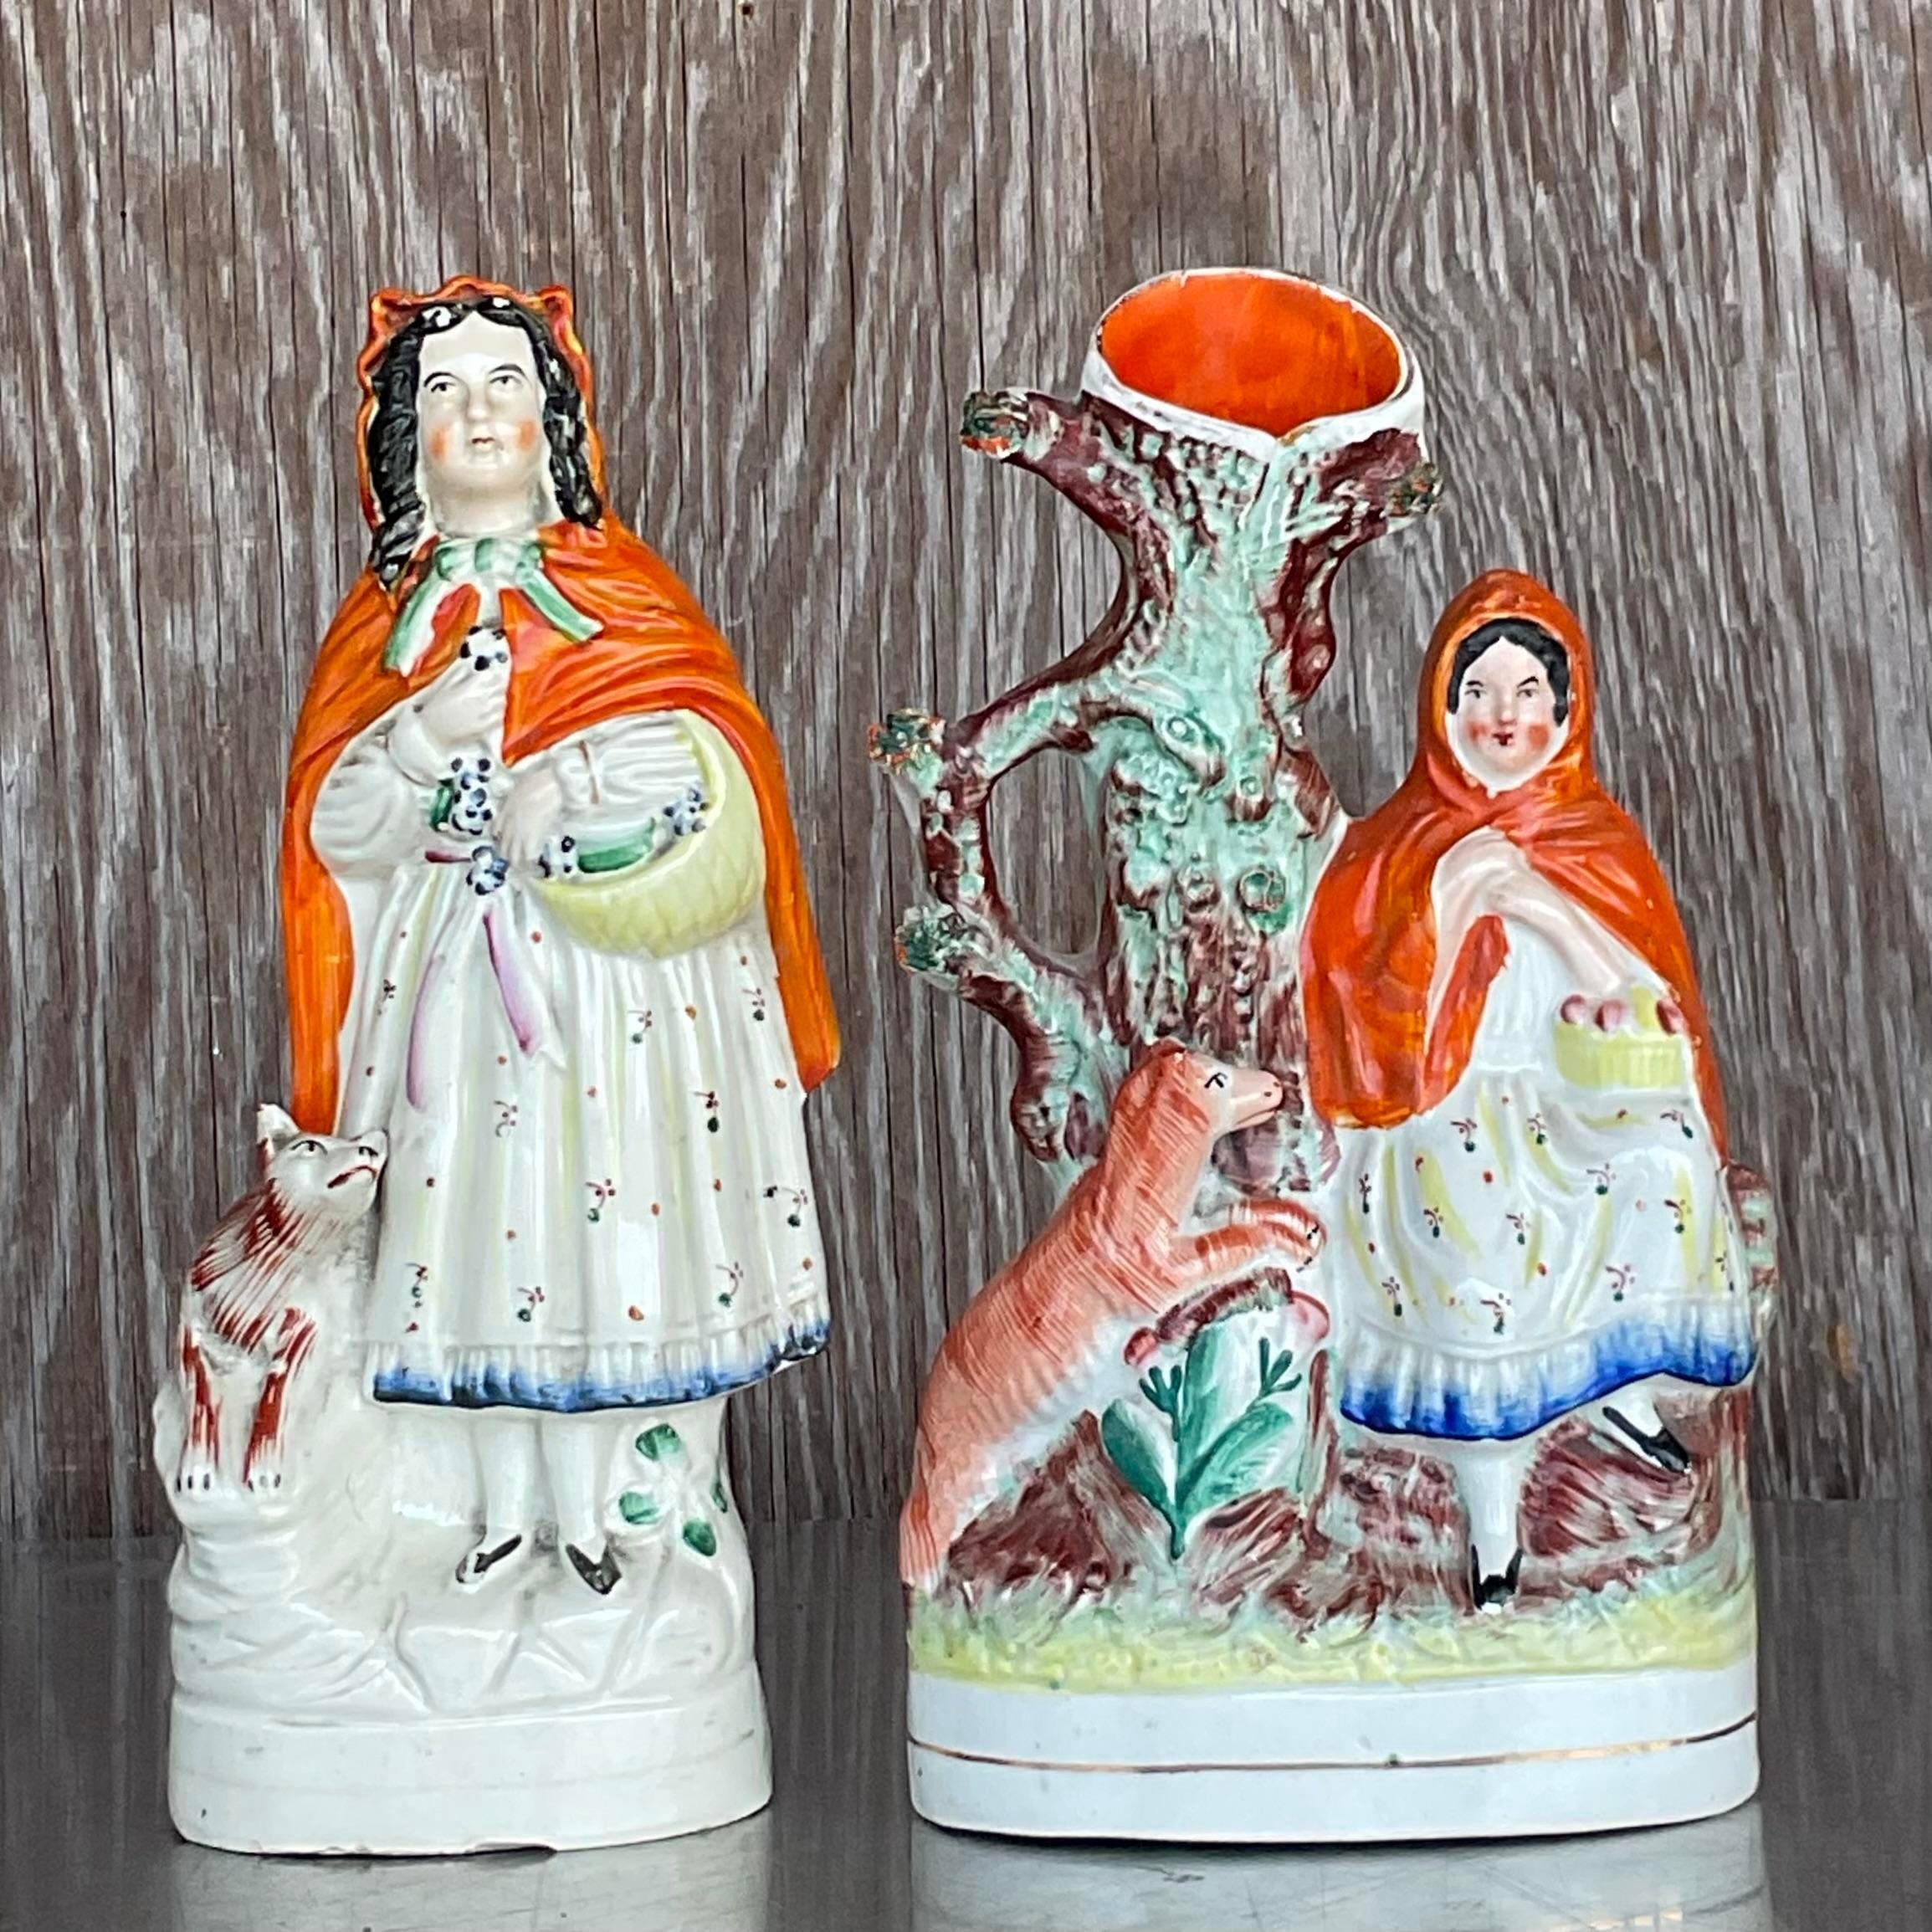 20th Century Vintage Regency Staffordshire Style Figurines - Set of 2 For Sale